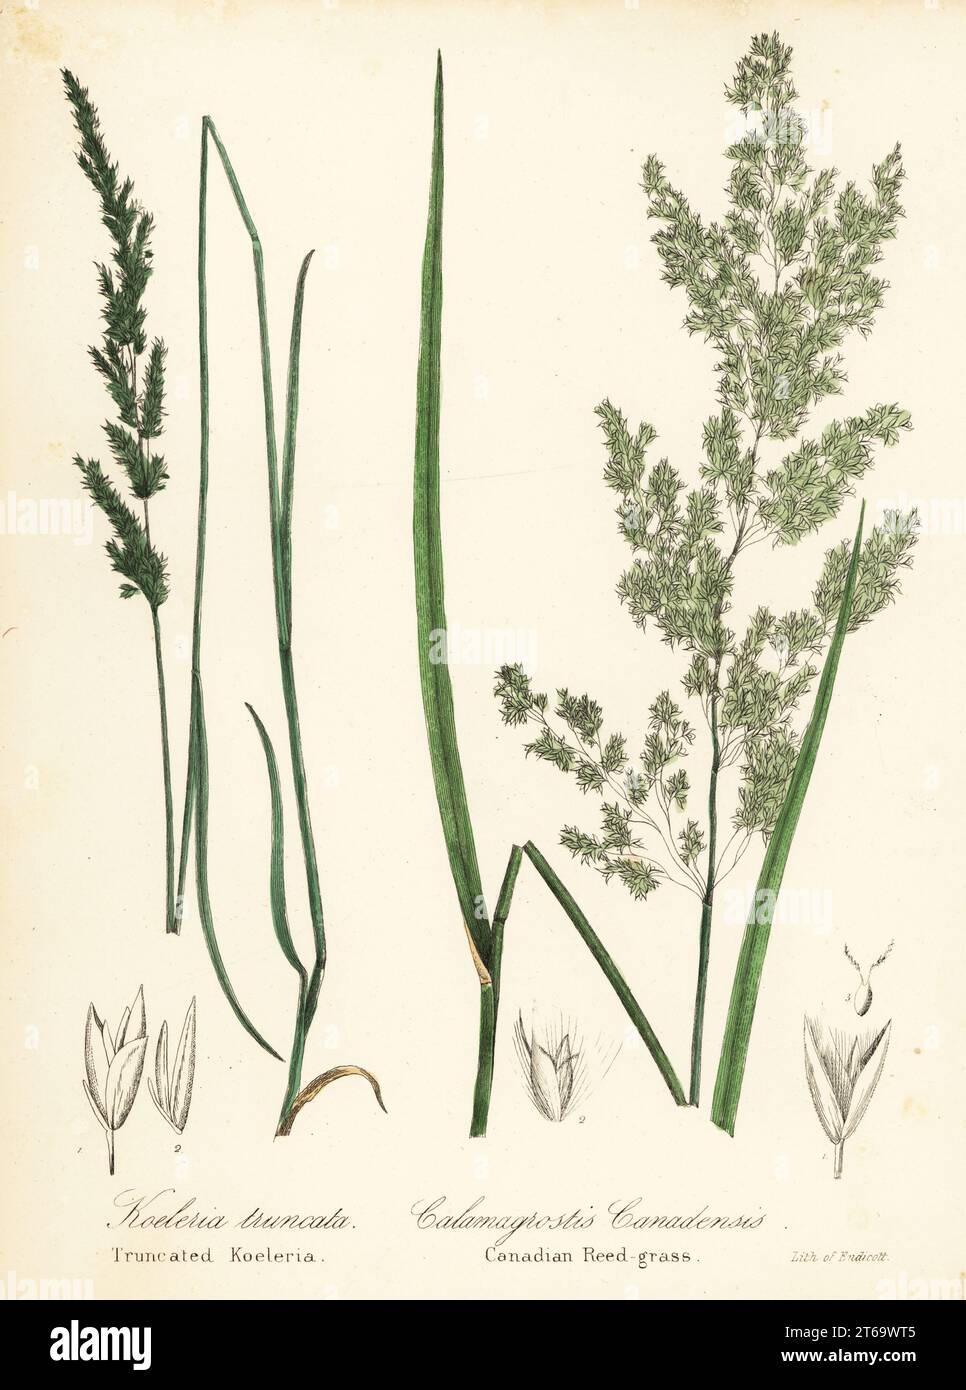 Prairie wedgescale, Sphenopholis obtusata, and Canadian reed-grass, Calamagrostis canadensis. Handcoloured lithograph by Endicott after a botanical illustration from John Torreys A Flora of the State of New York, Carroll and Cook, Albany, 1843. The plates drawn by John Torrey, Agnes Mitchell, Elizabeth Paoley and Swinton. John Torrey was an American botanist, chemist and physician 1796-1873. Stock Photo